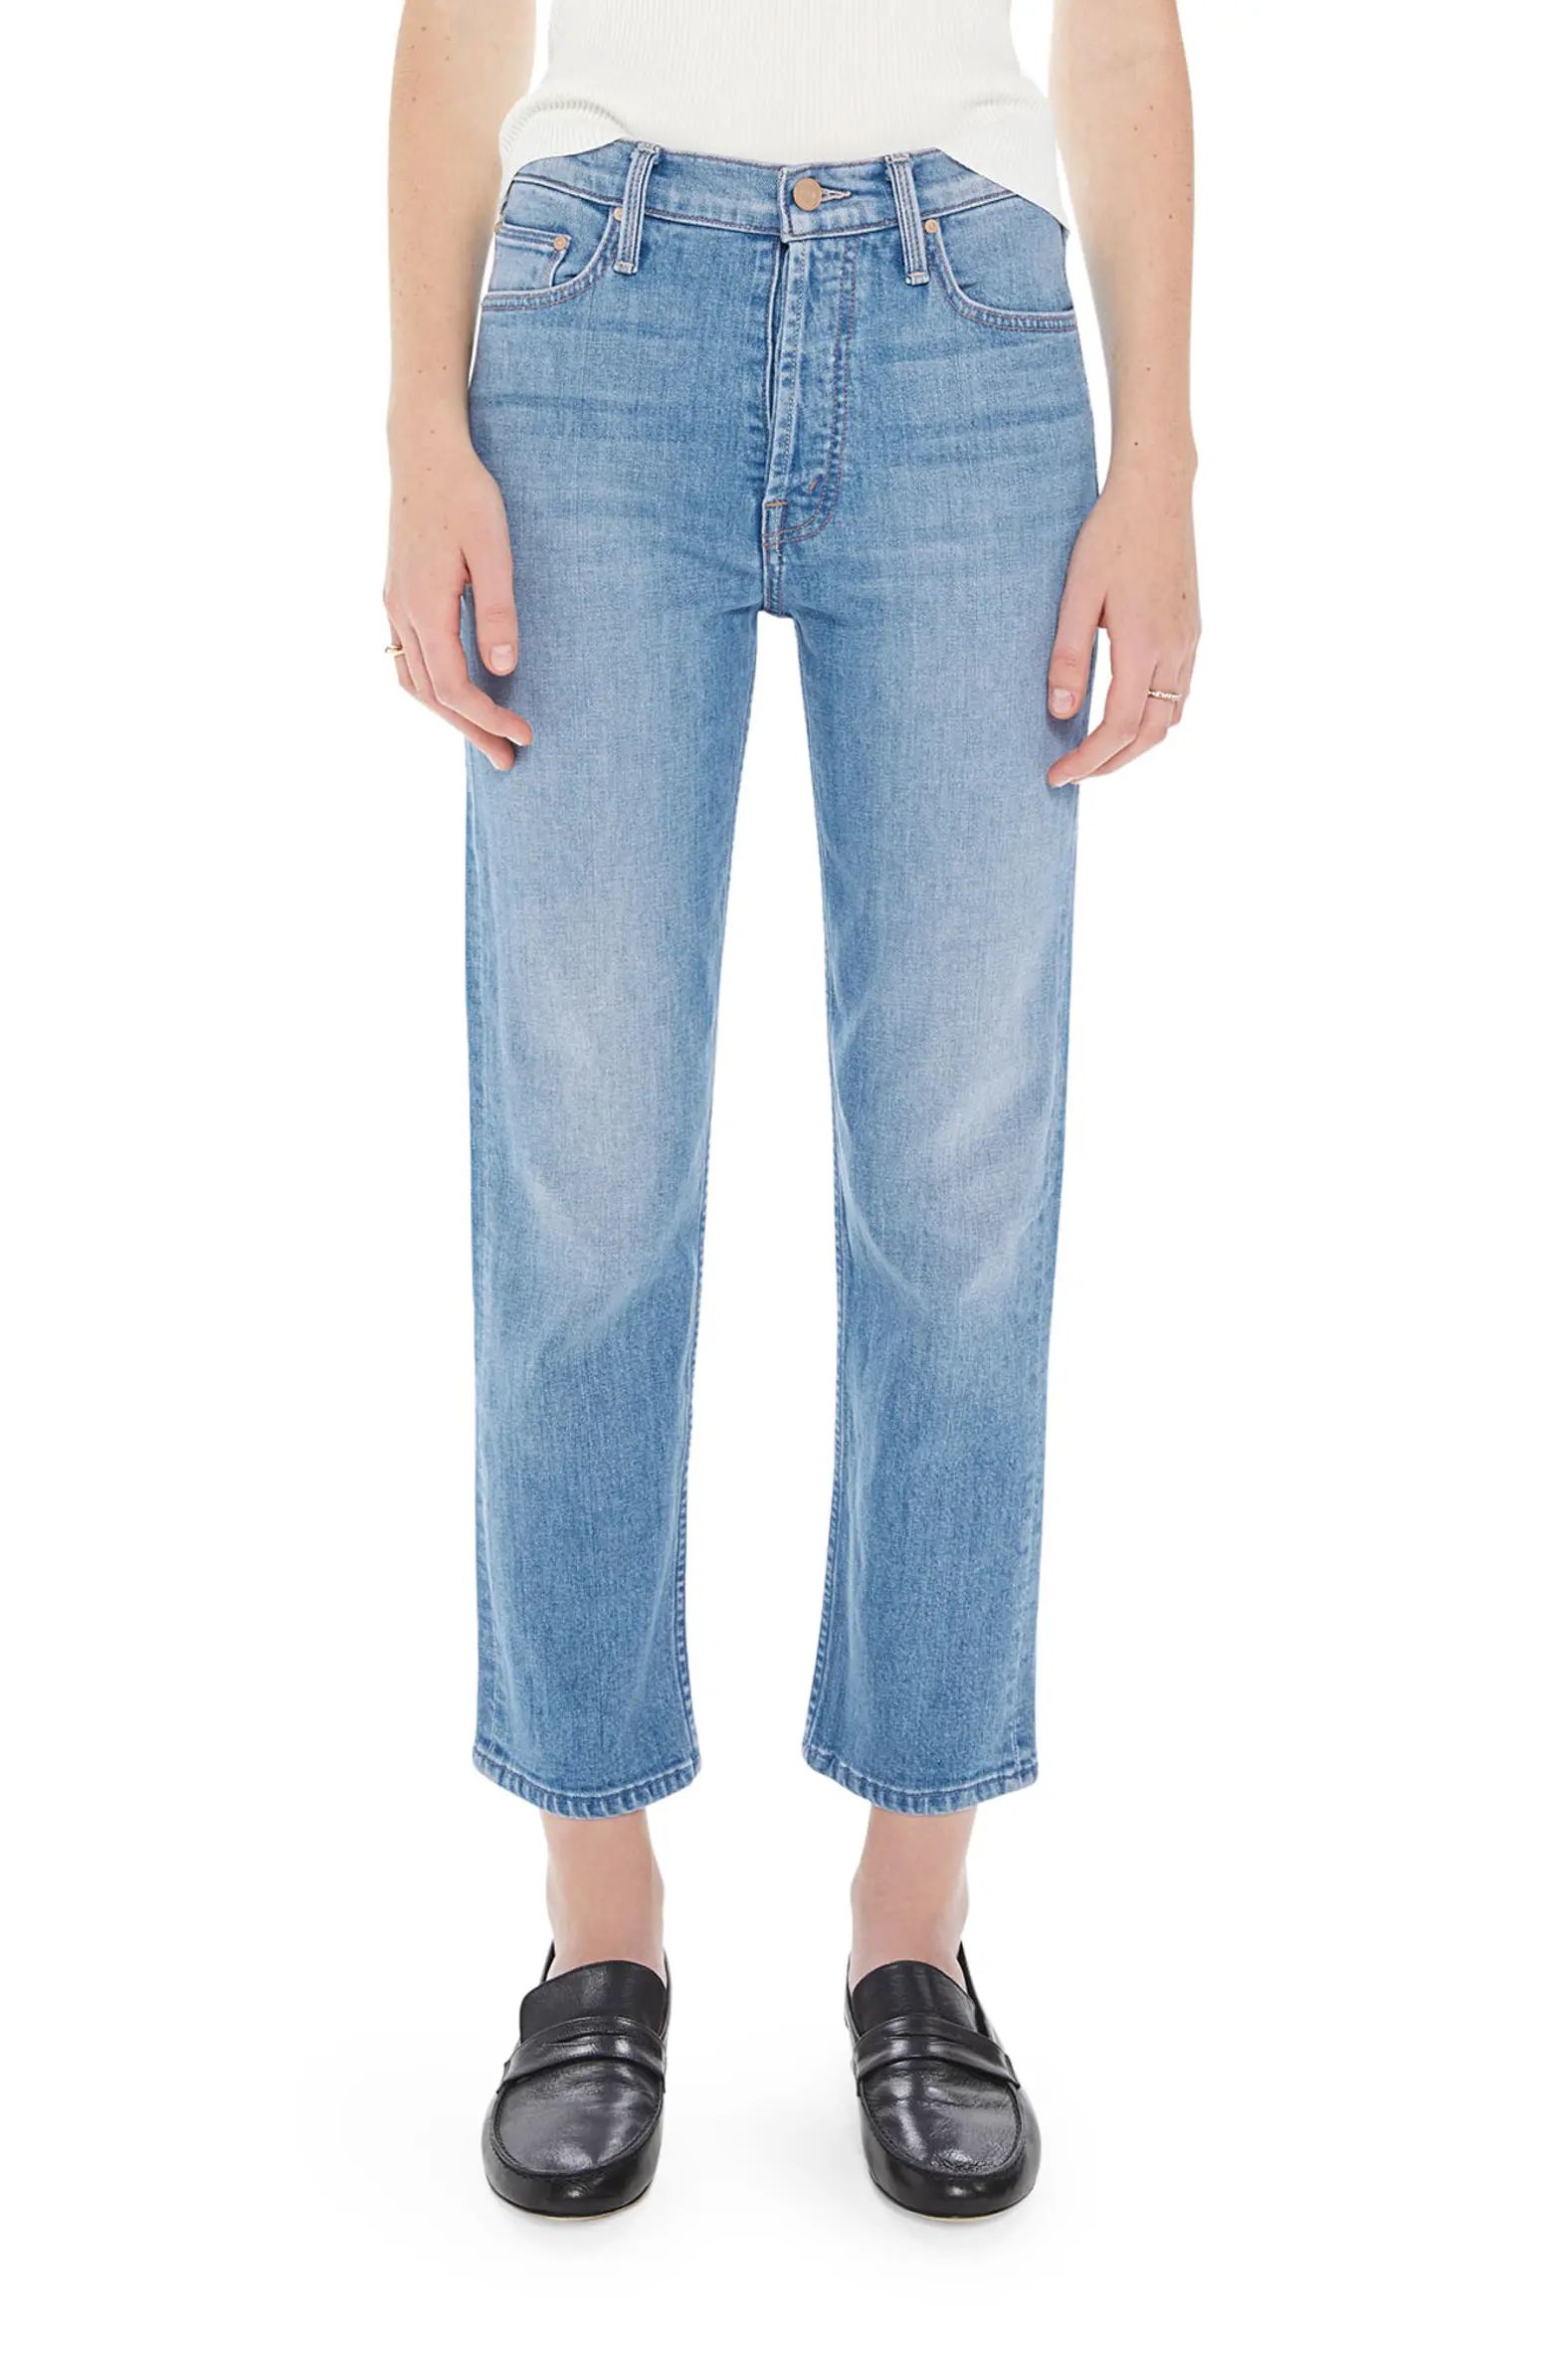 Rating 3.1out of5stars(10)10The Tomcat Crop Straight Leg JeansMOTHER | Nordstrom